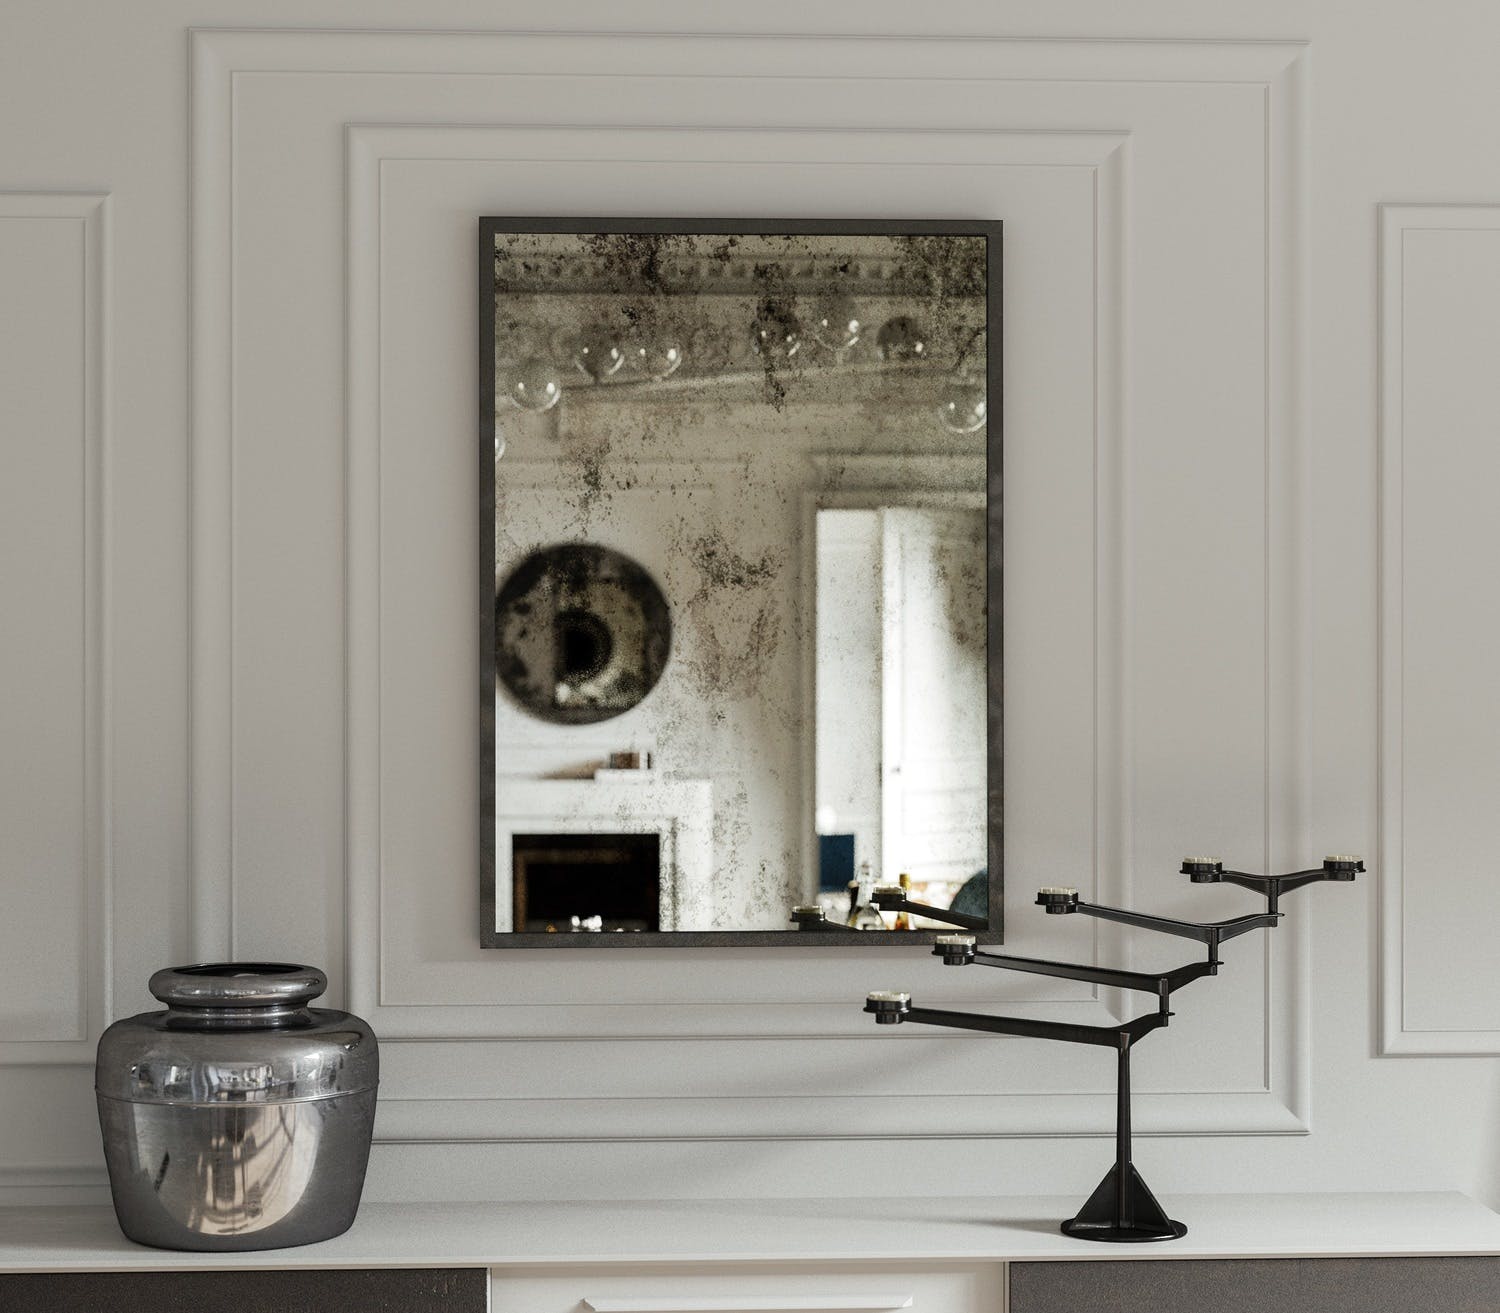 Eglomise Mirror: Make Your Room More Artsy and Luxurious!